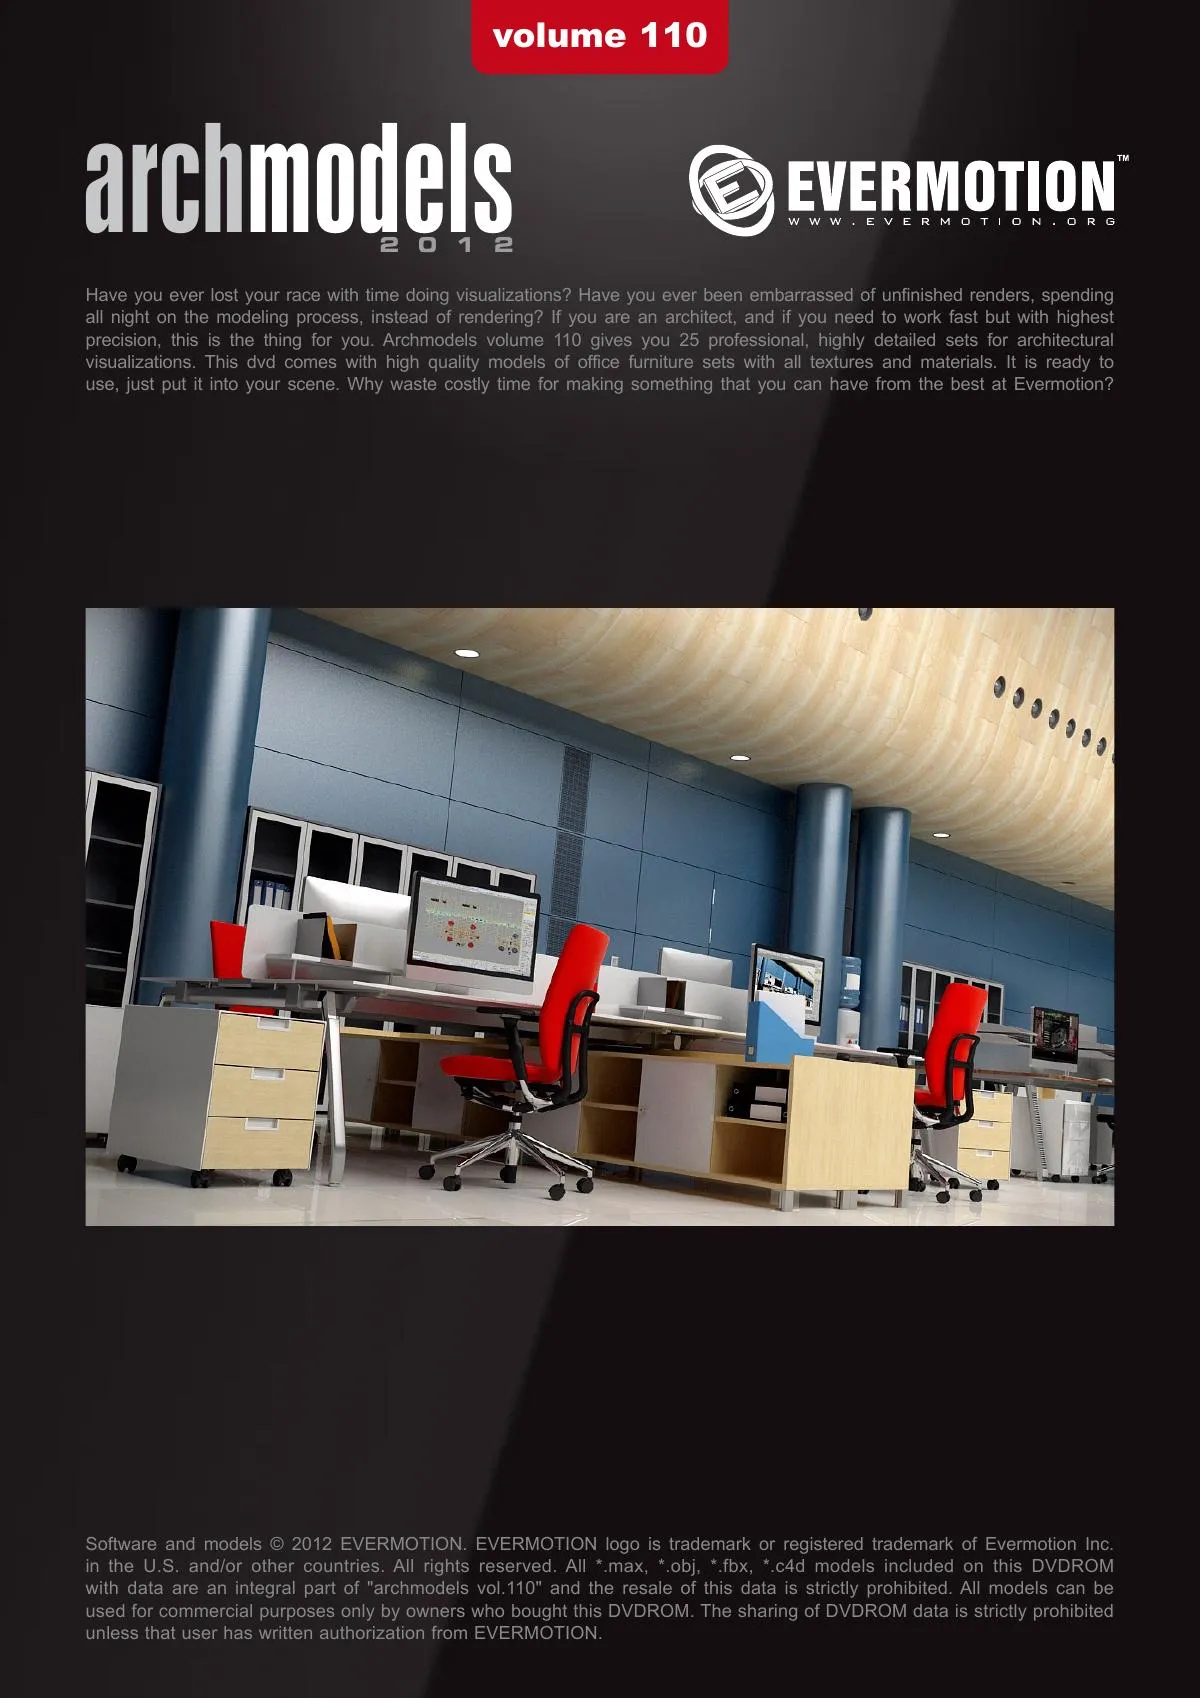 Evermotion Archmodels Vol 110 [office furniture]